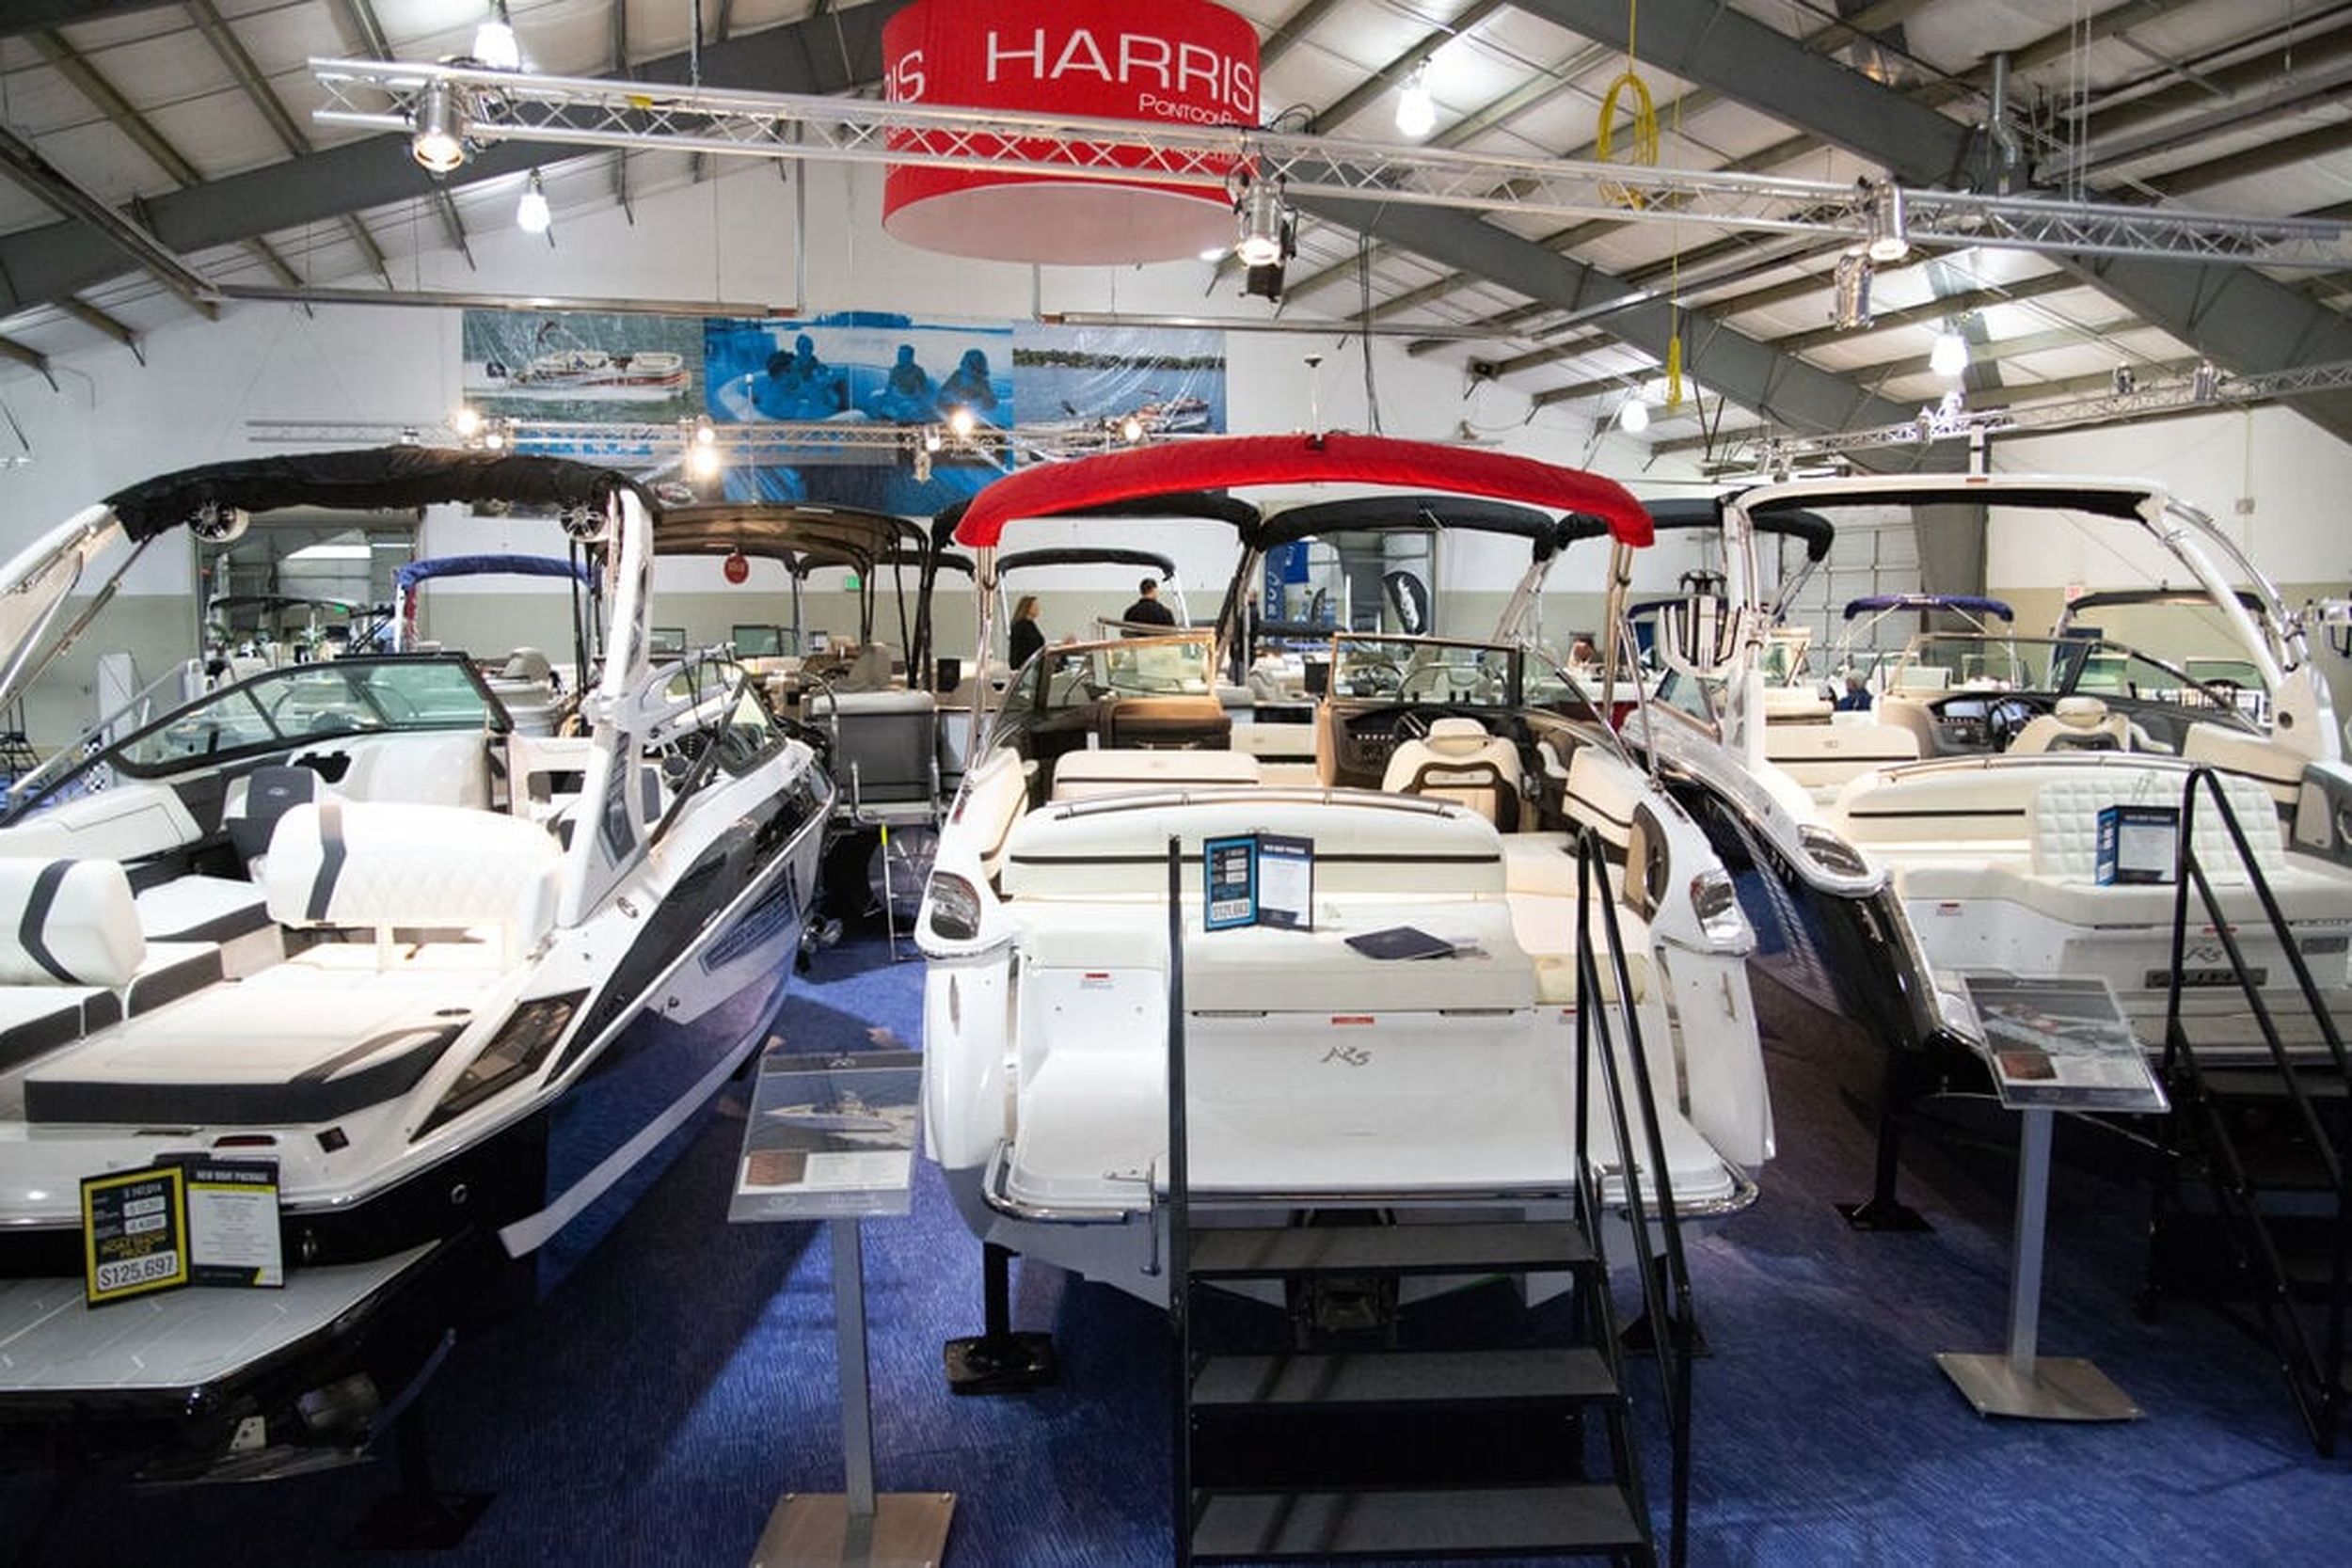 Spokane Boat Show returns this week after two year hiatus | The